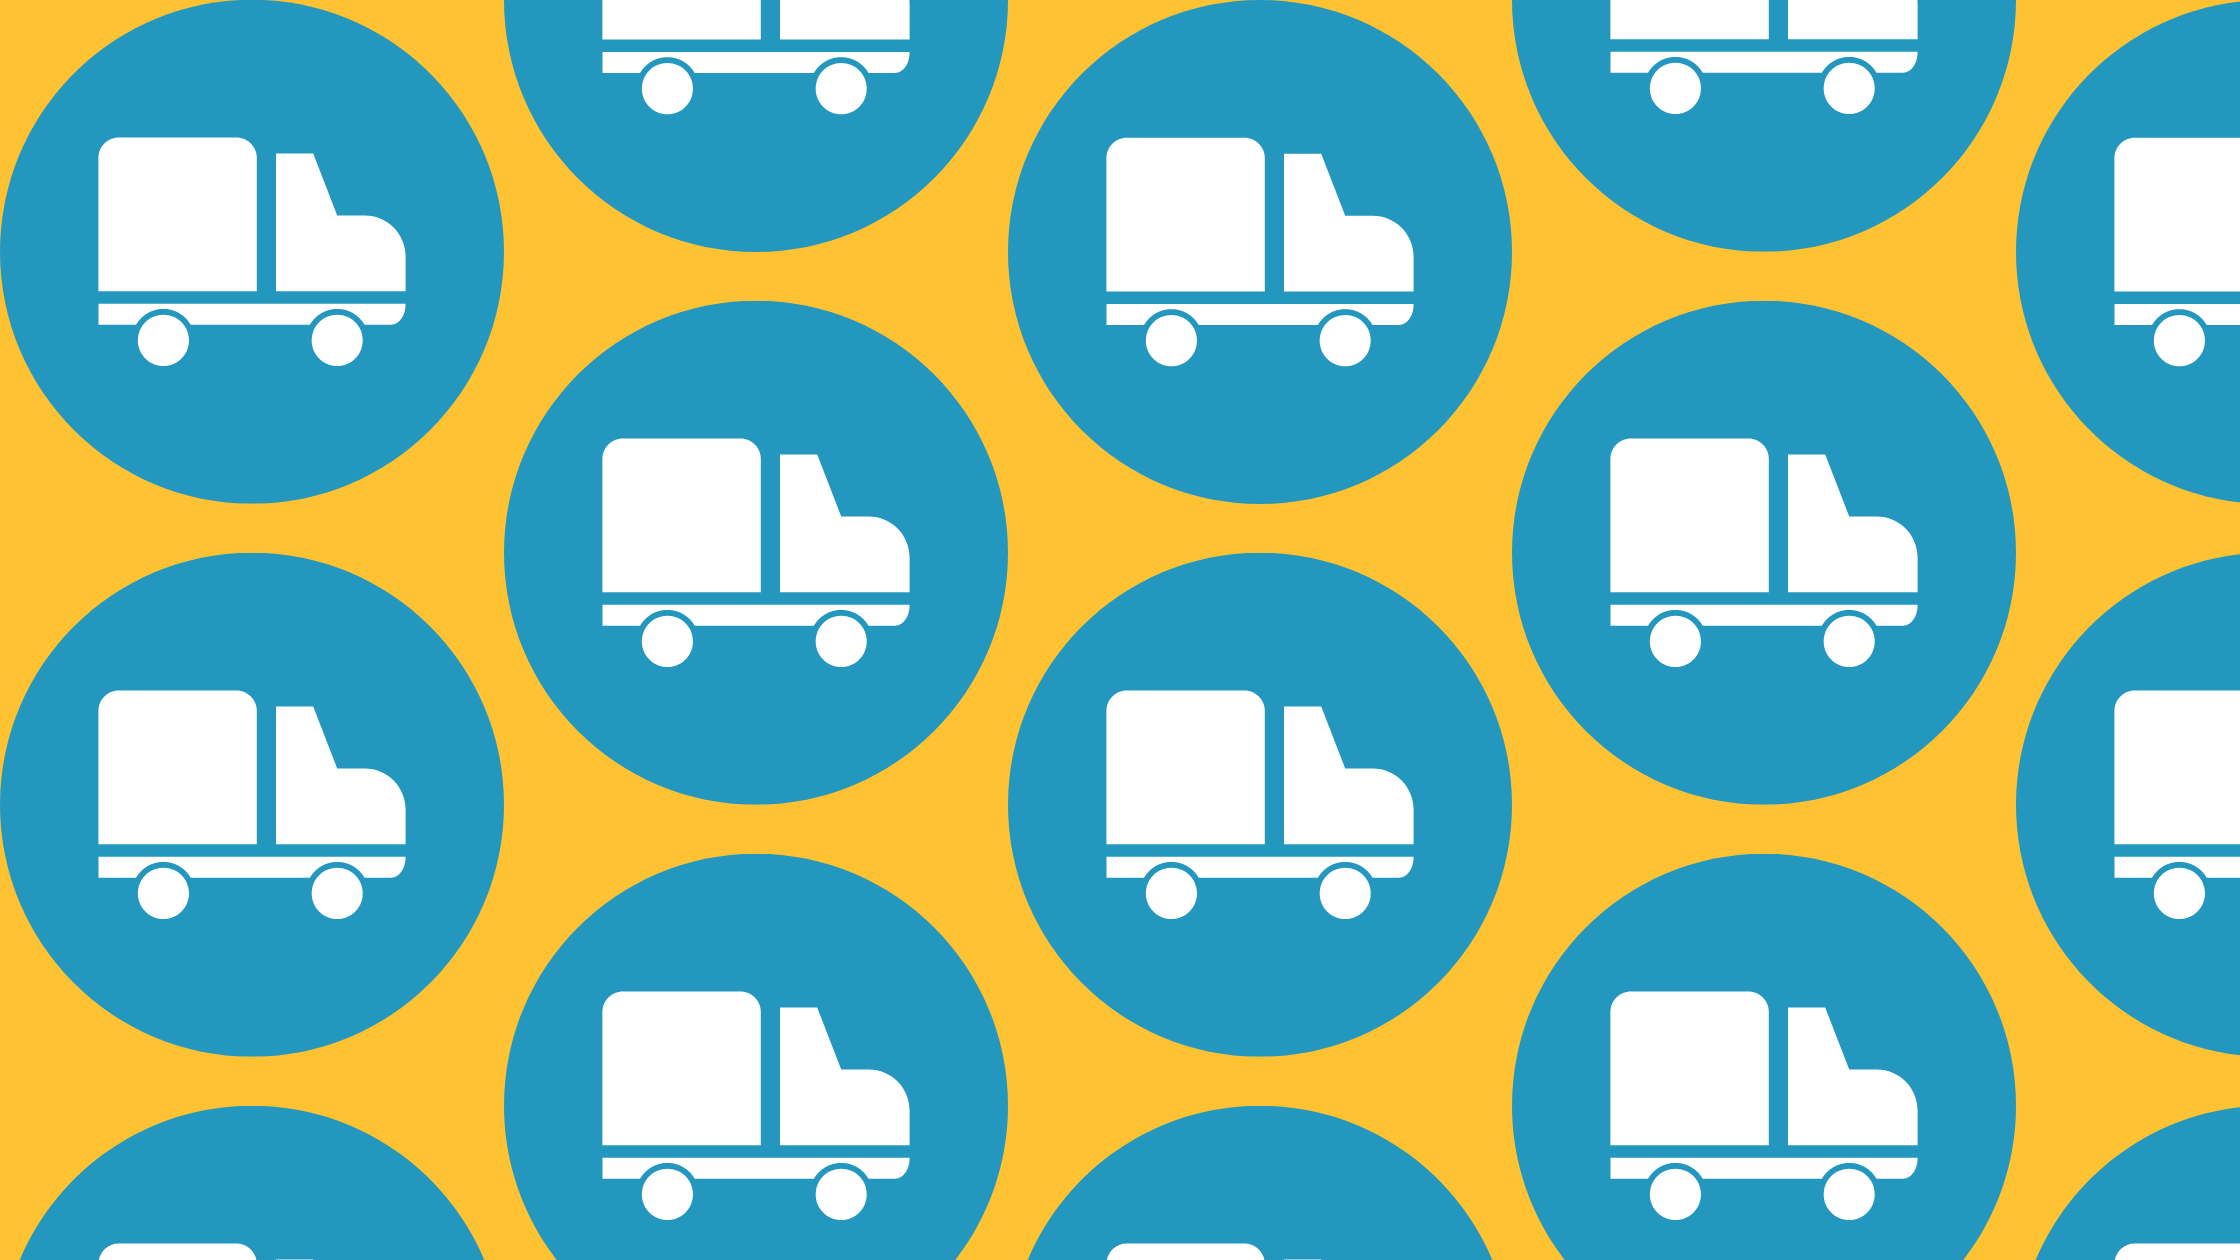 Icons of shipping trucks in circles